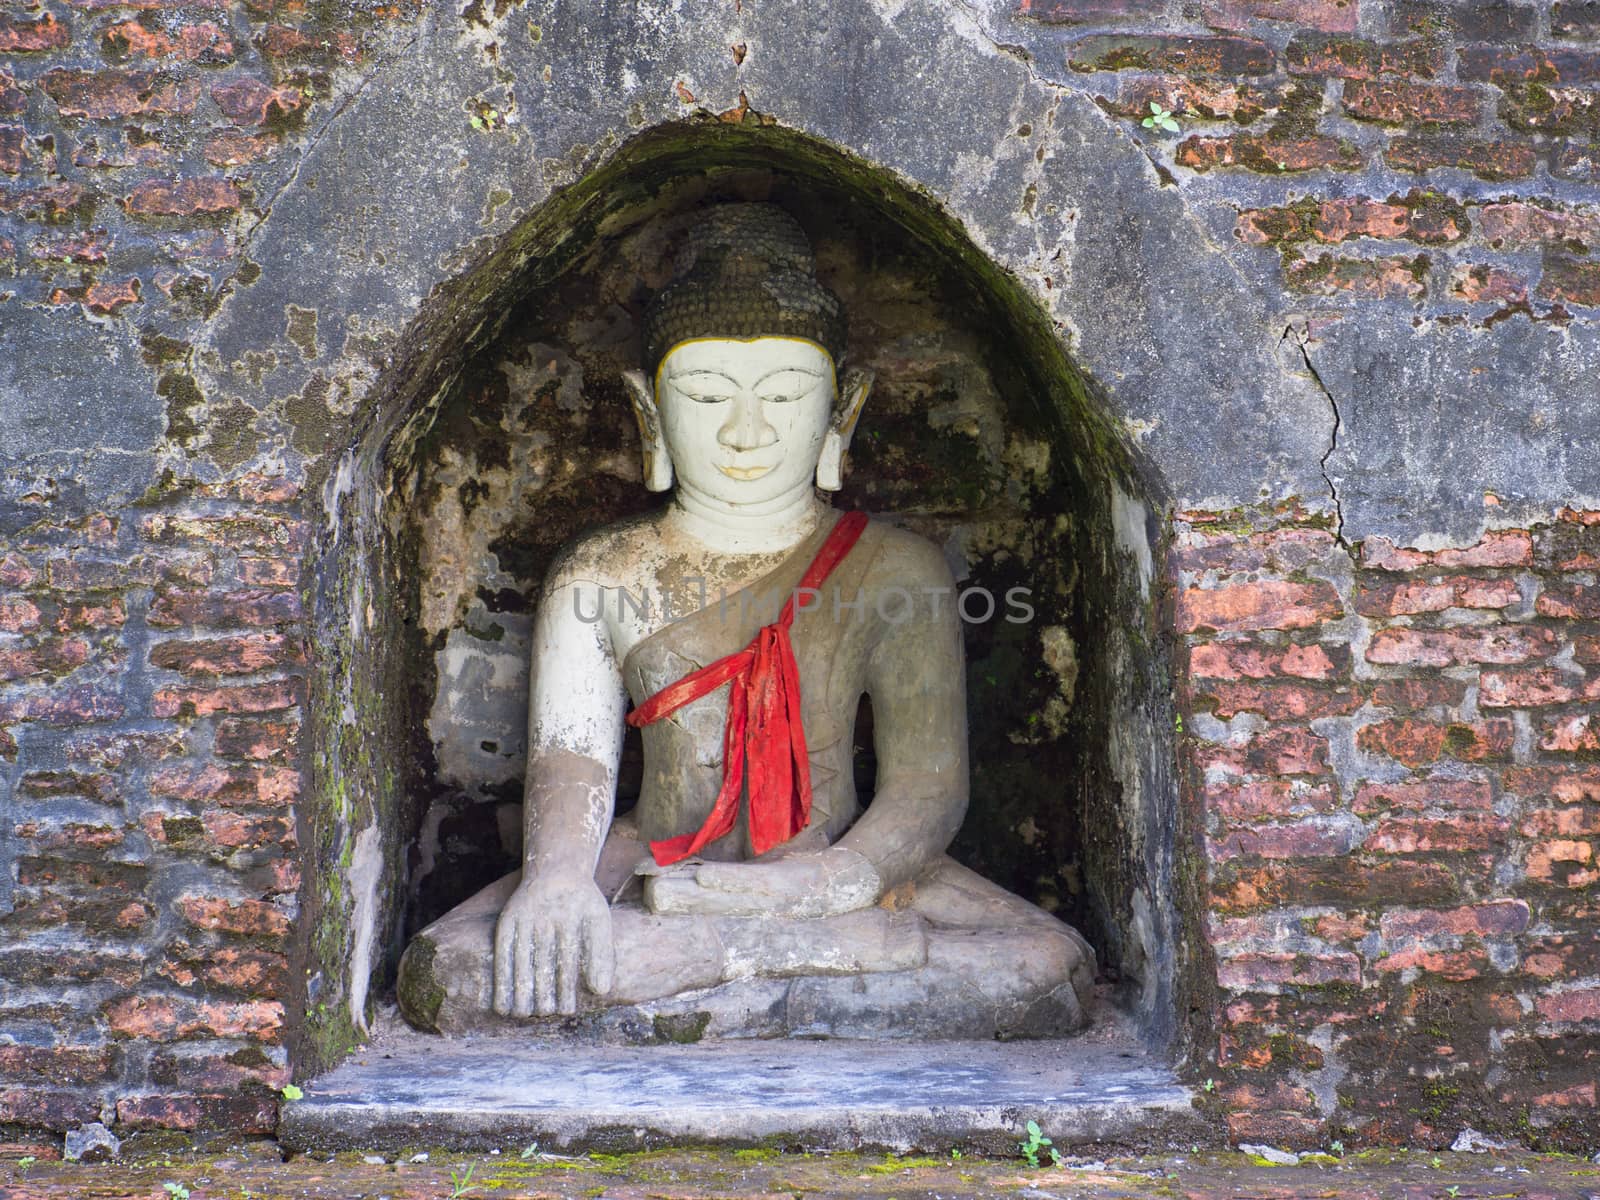 Buddha image in a small niche of an ancient stupa in Mrauk U, Rakhine State in Myanmar.